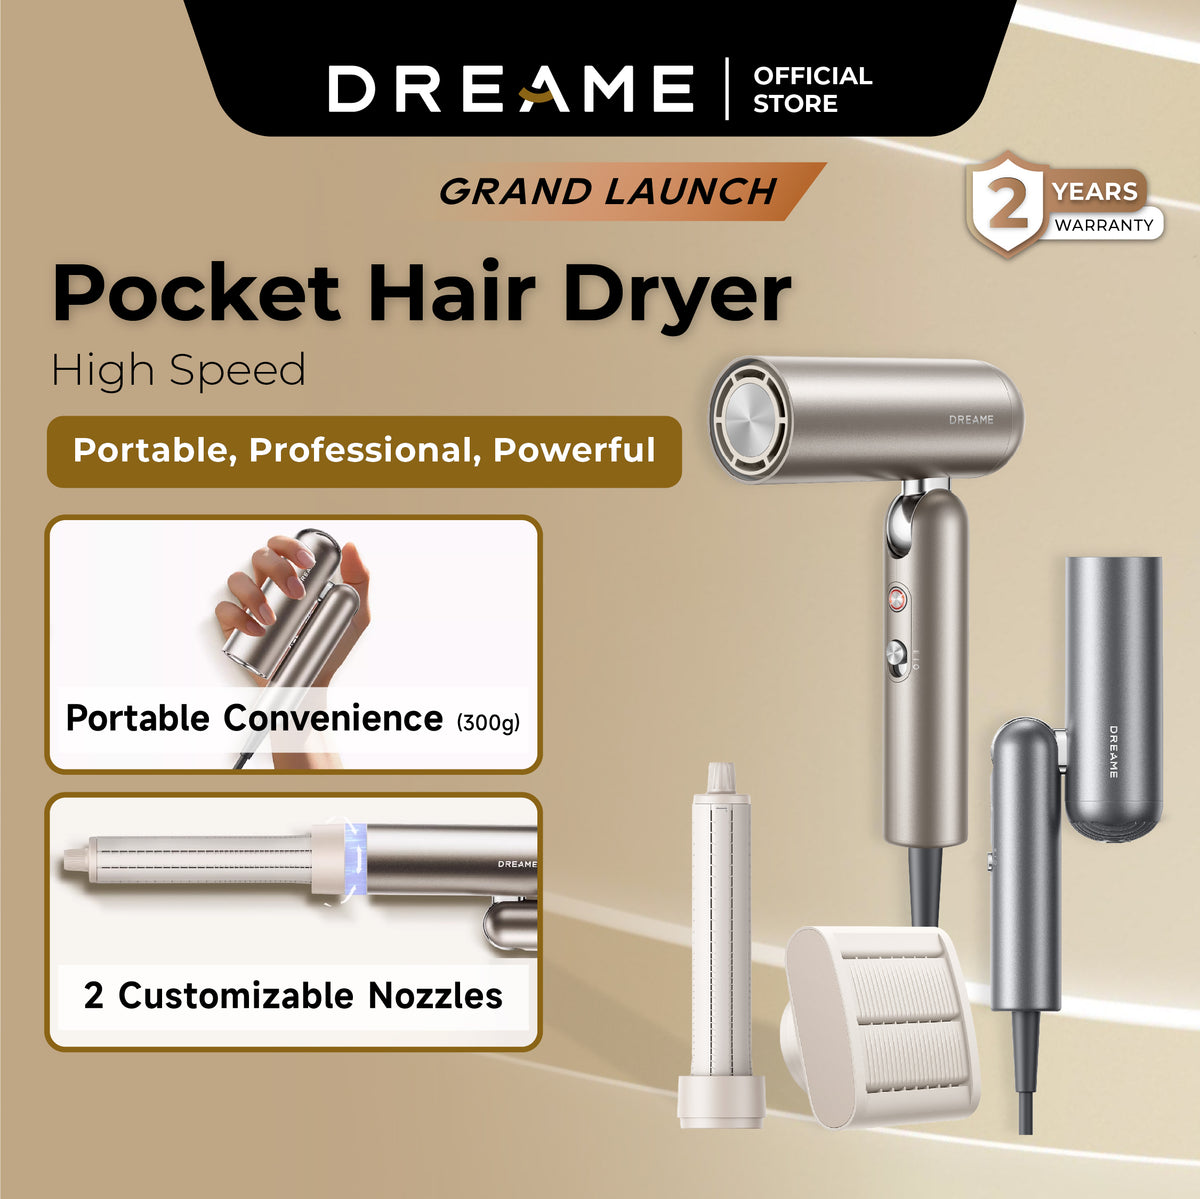 【NEW】 Dreame Pocket High-Speed Hair Dryer | Curling, Unfrizz Nozzles | 300g Portable, Powerful | 60dB